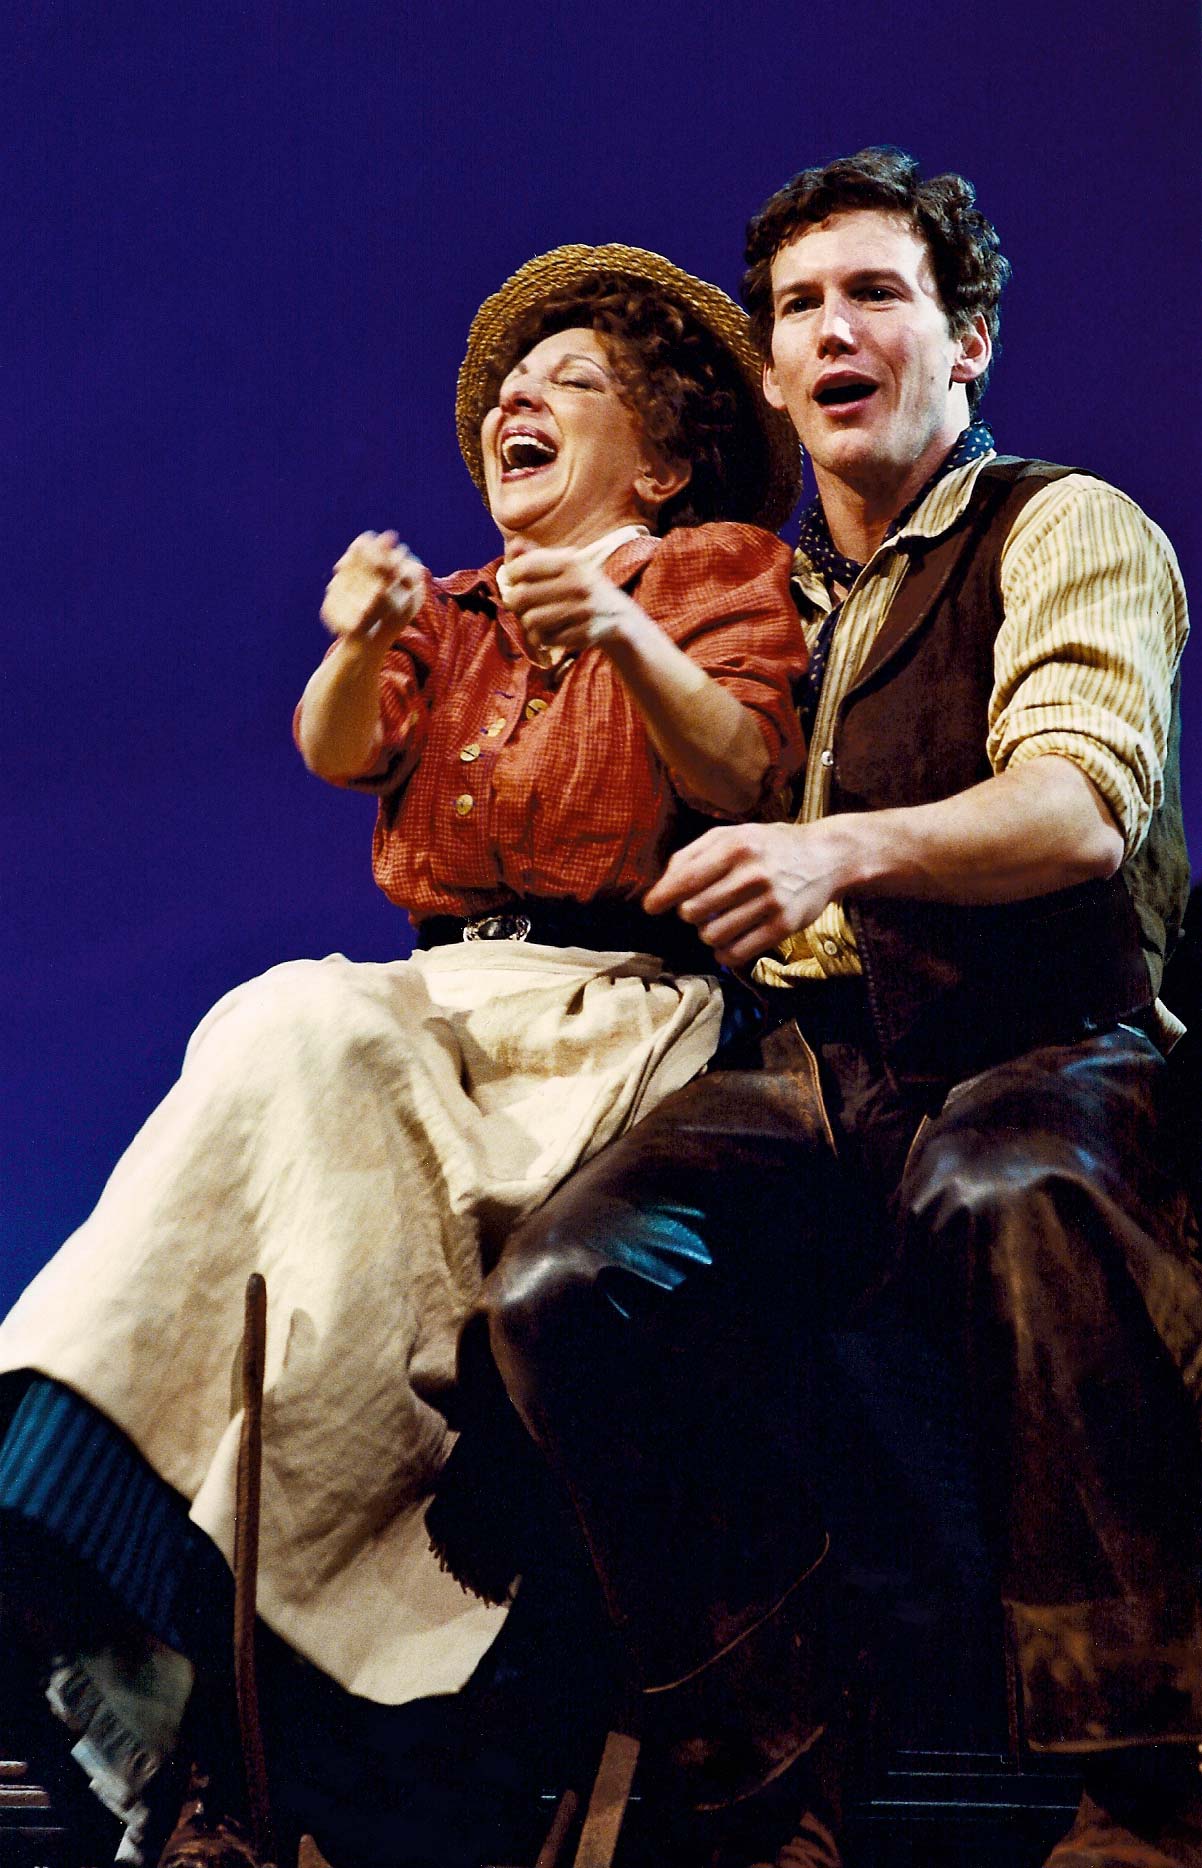 A photo from the 2002 Broadway production of Oklahoma!.